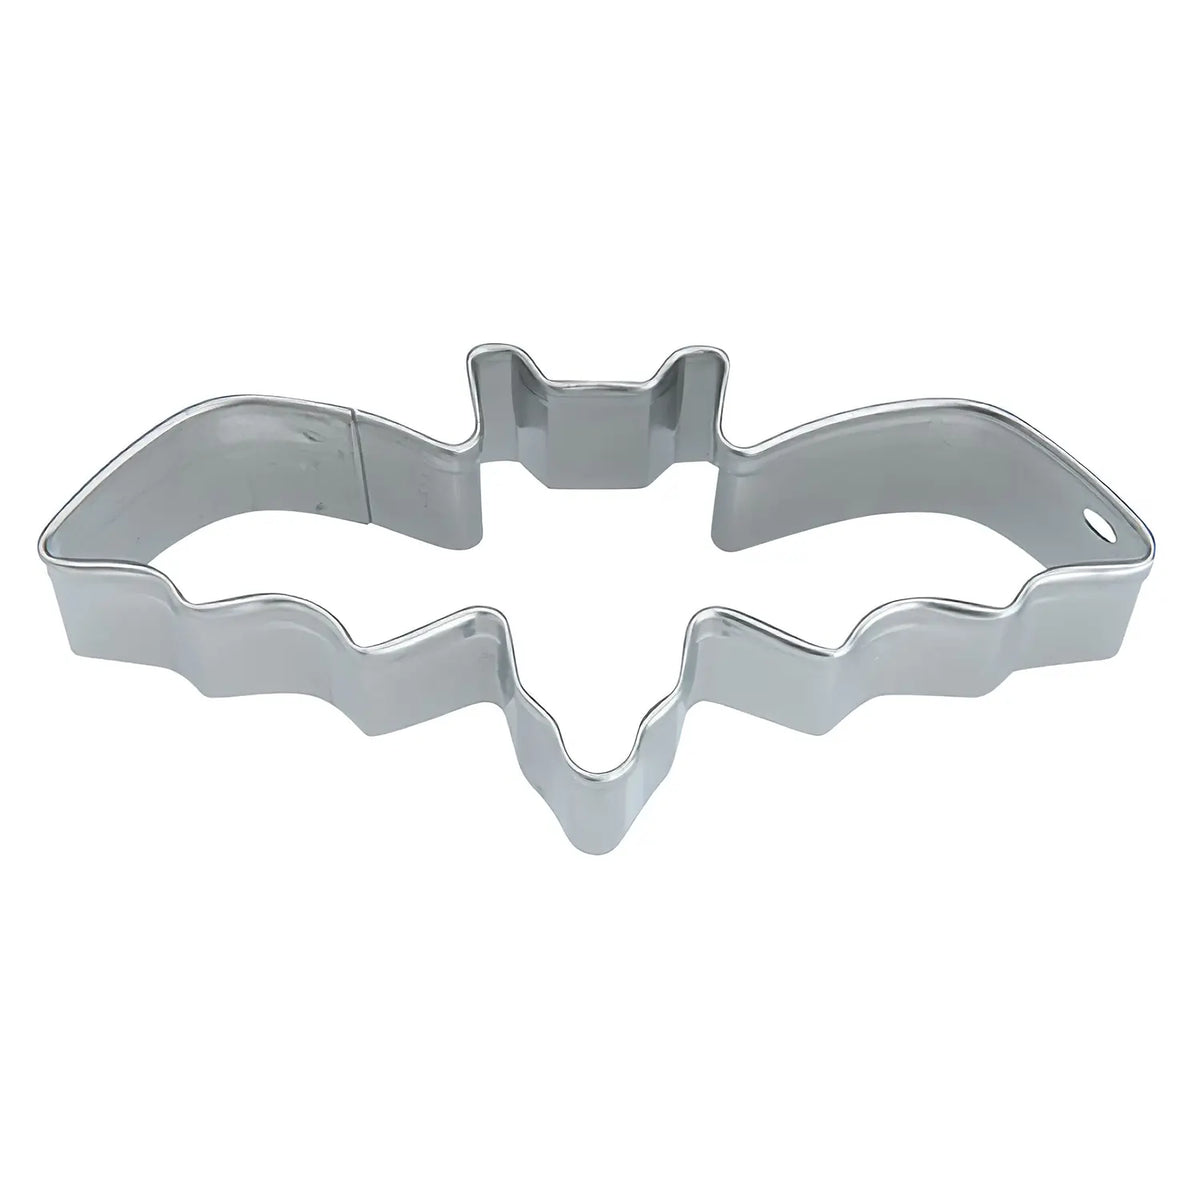 TIGERCROWN Cake Land Stainless Steel Cookie Cutter Bat